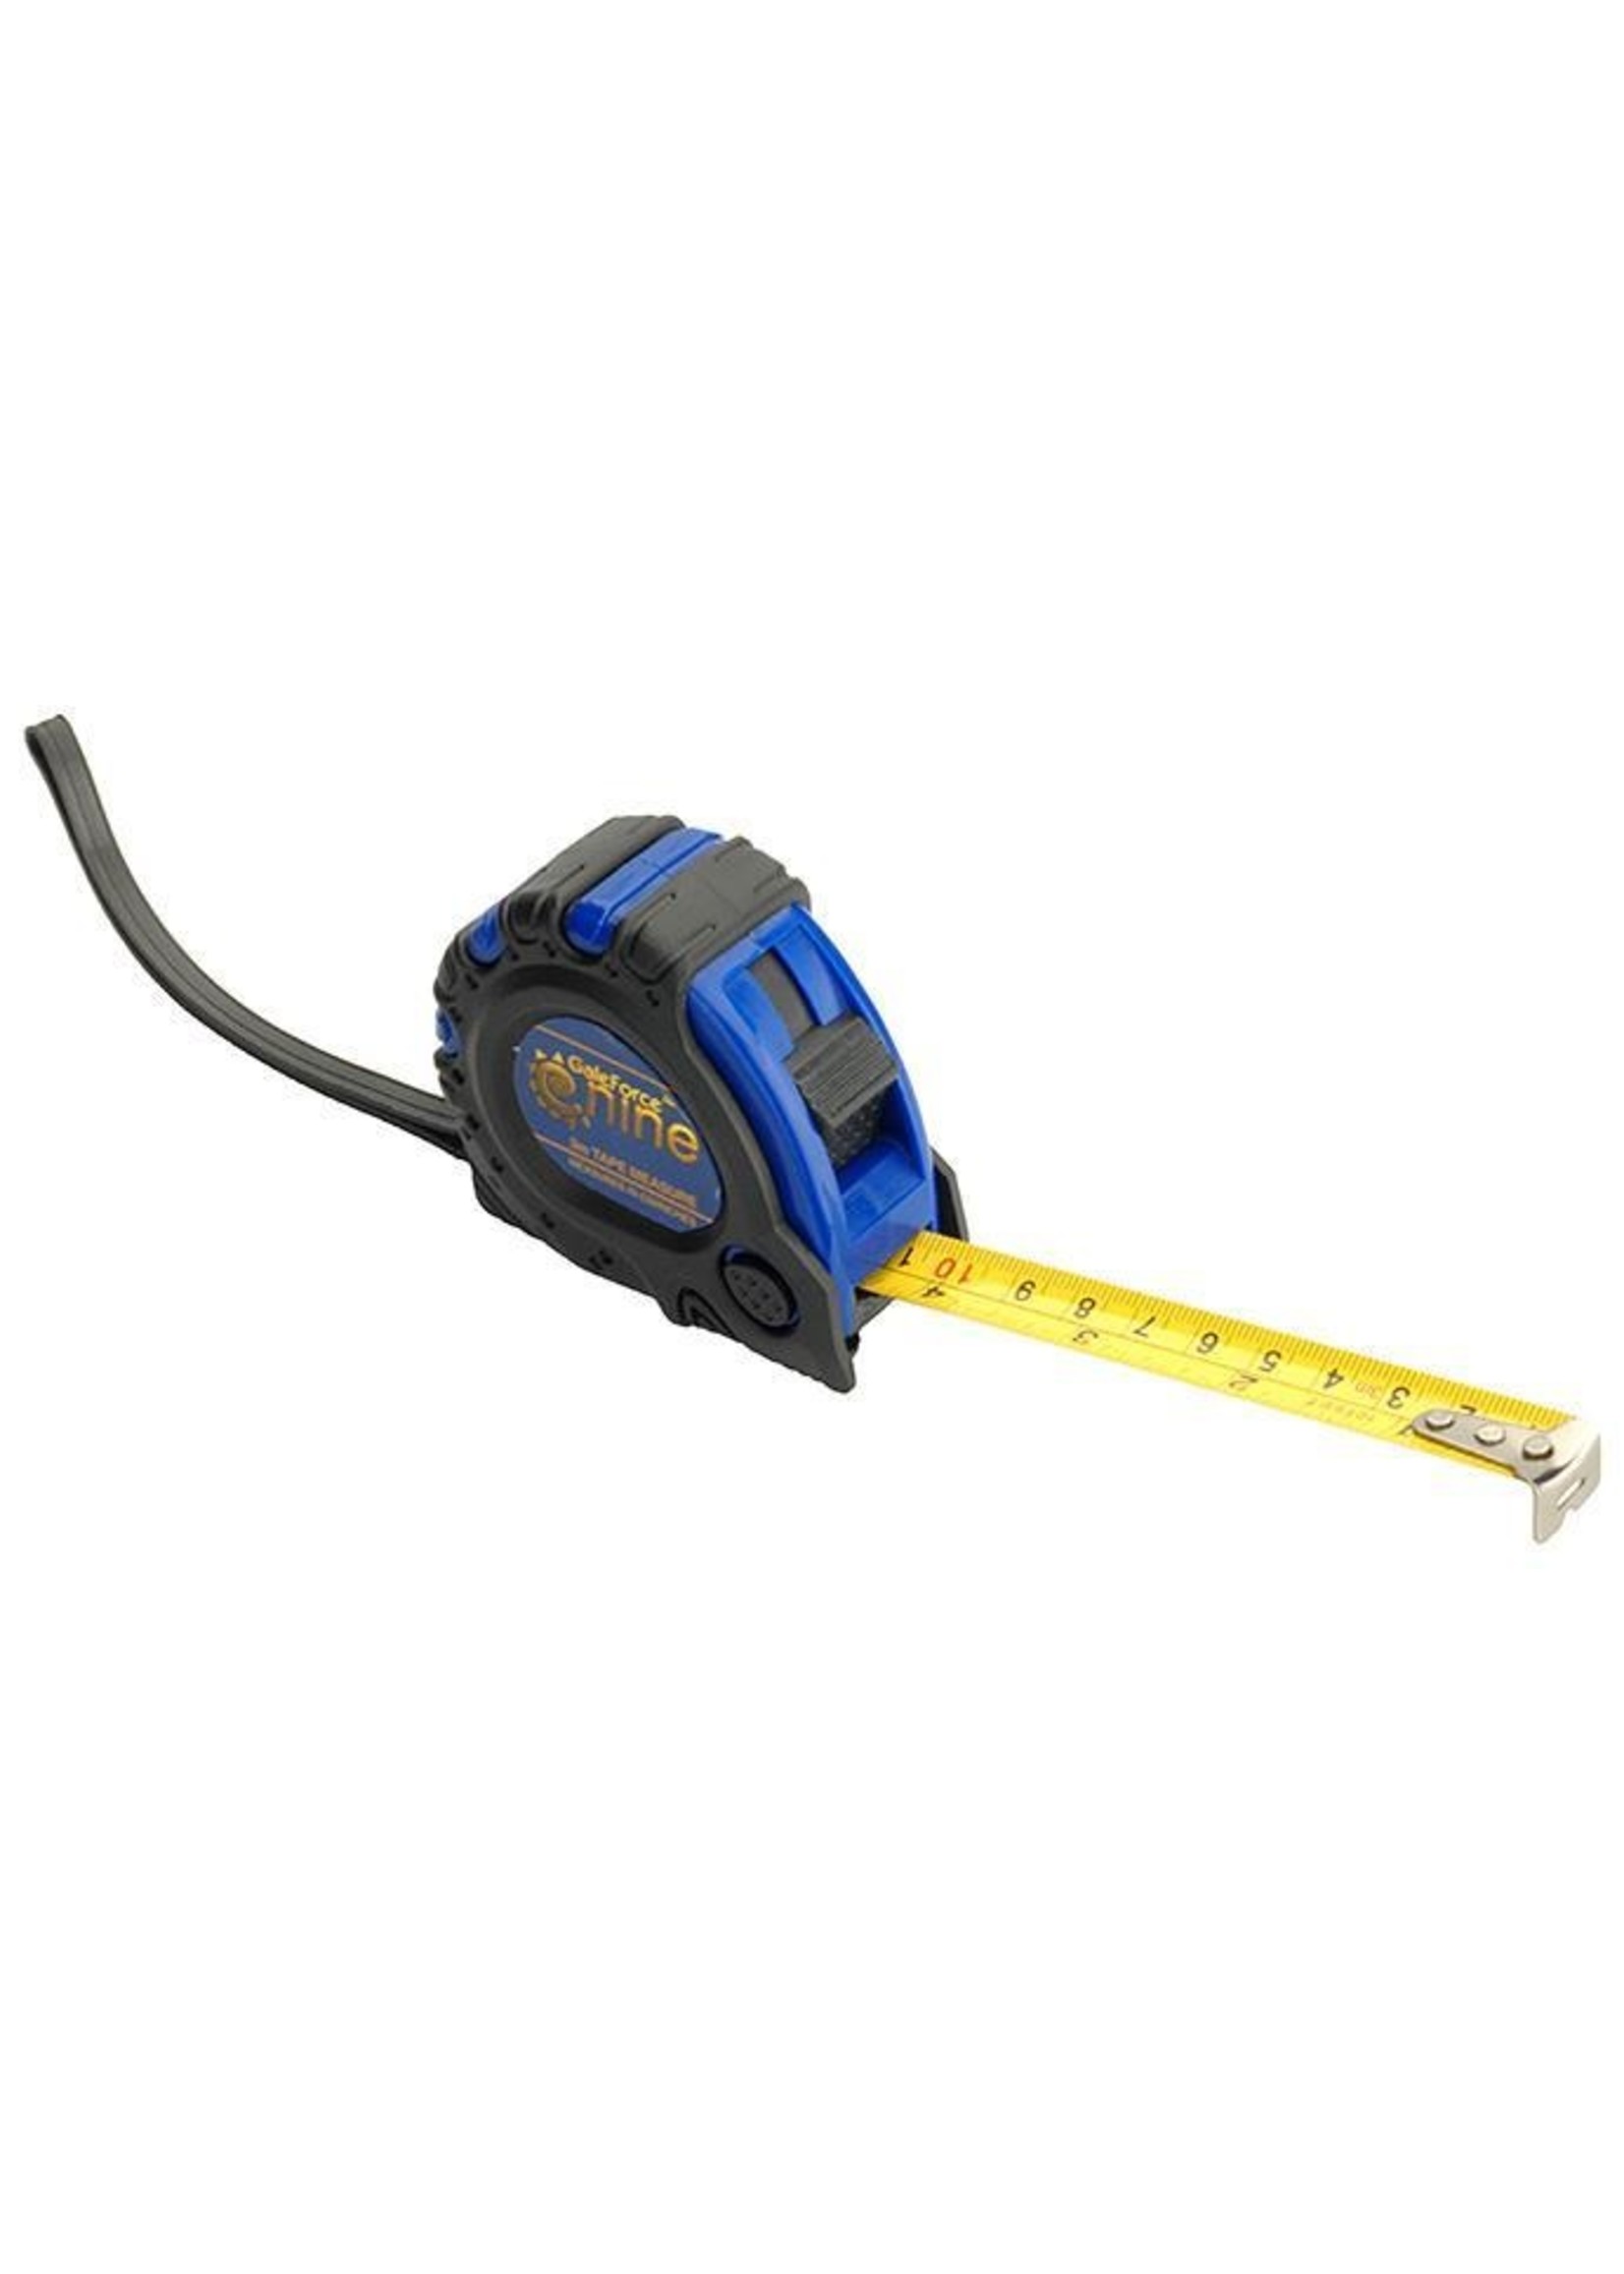 Gale Force 9 GF9 Measuring Tape